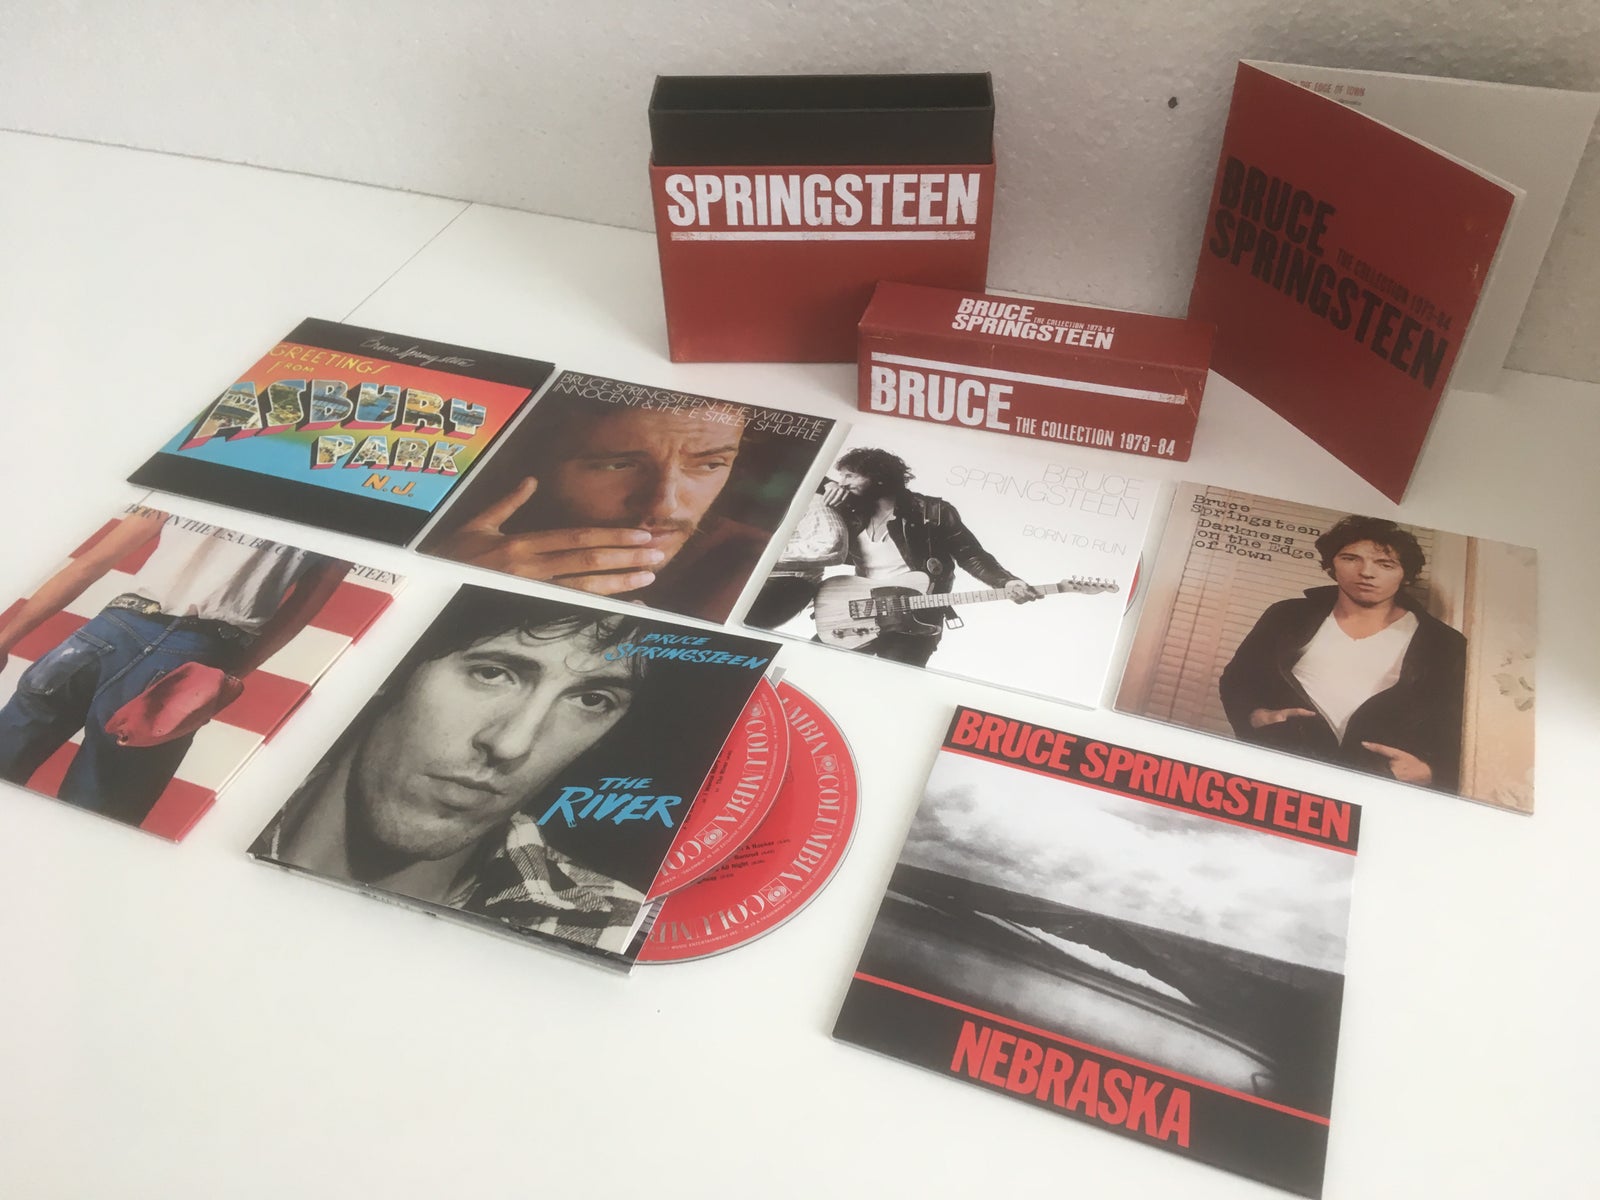 bruce springsteen the collection 1973-84 box boks: bruce